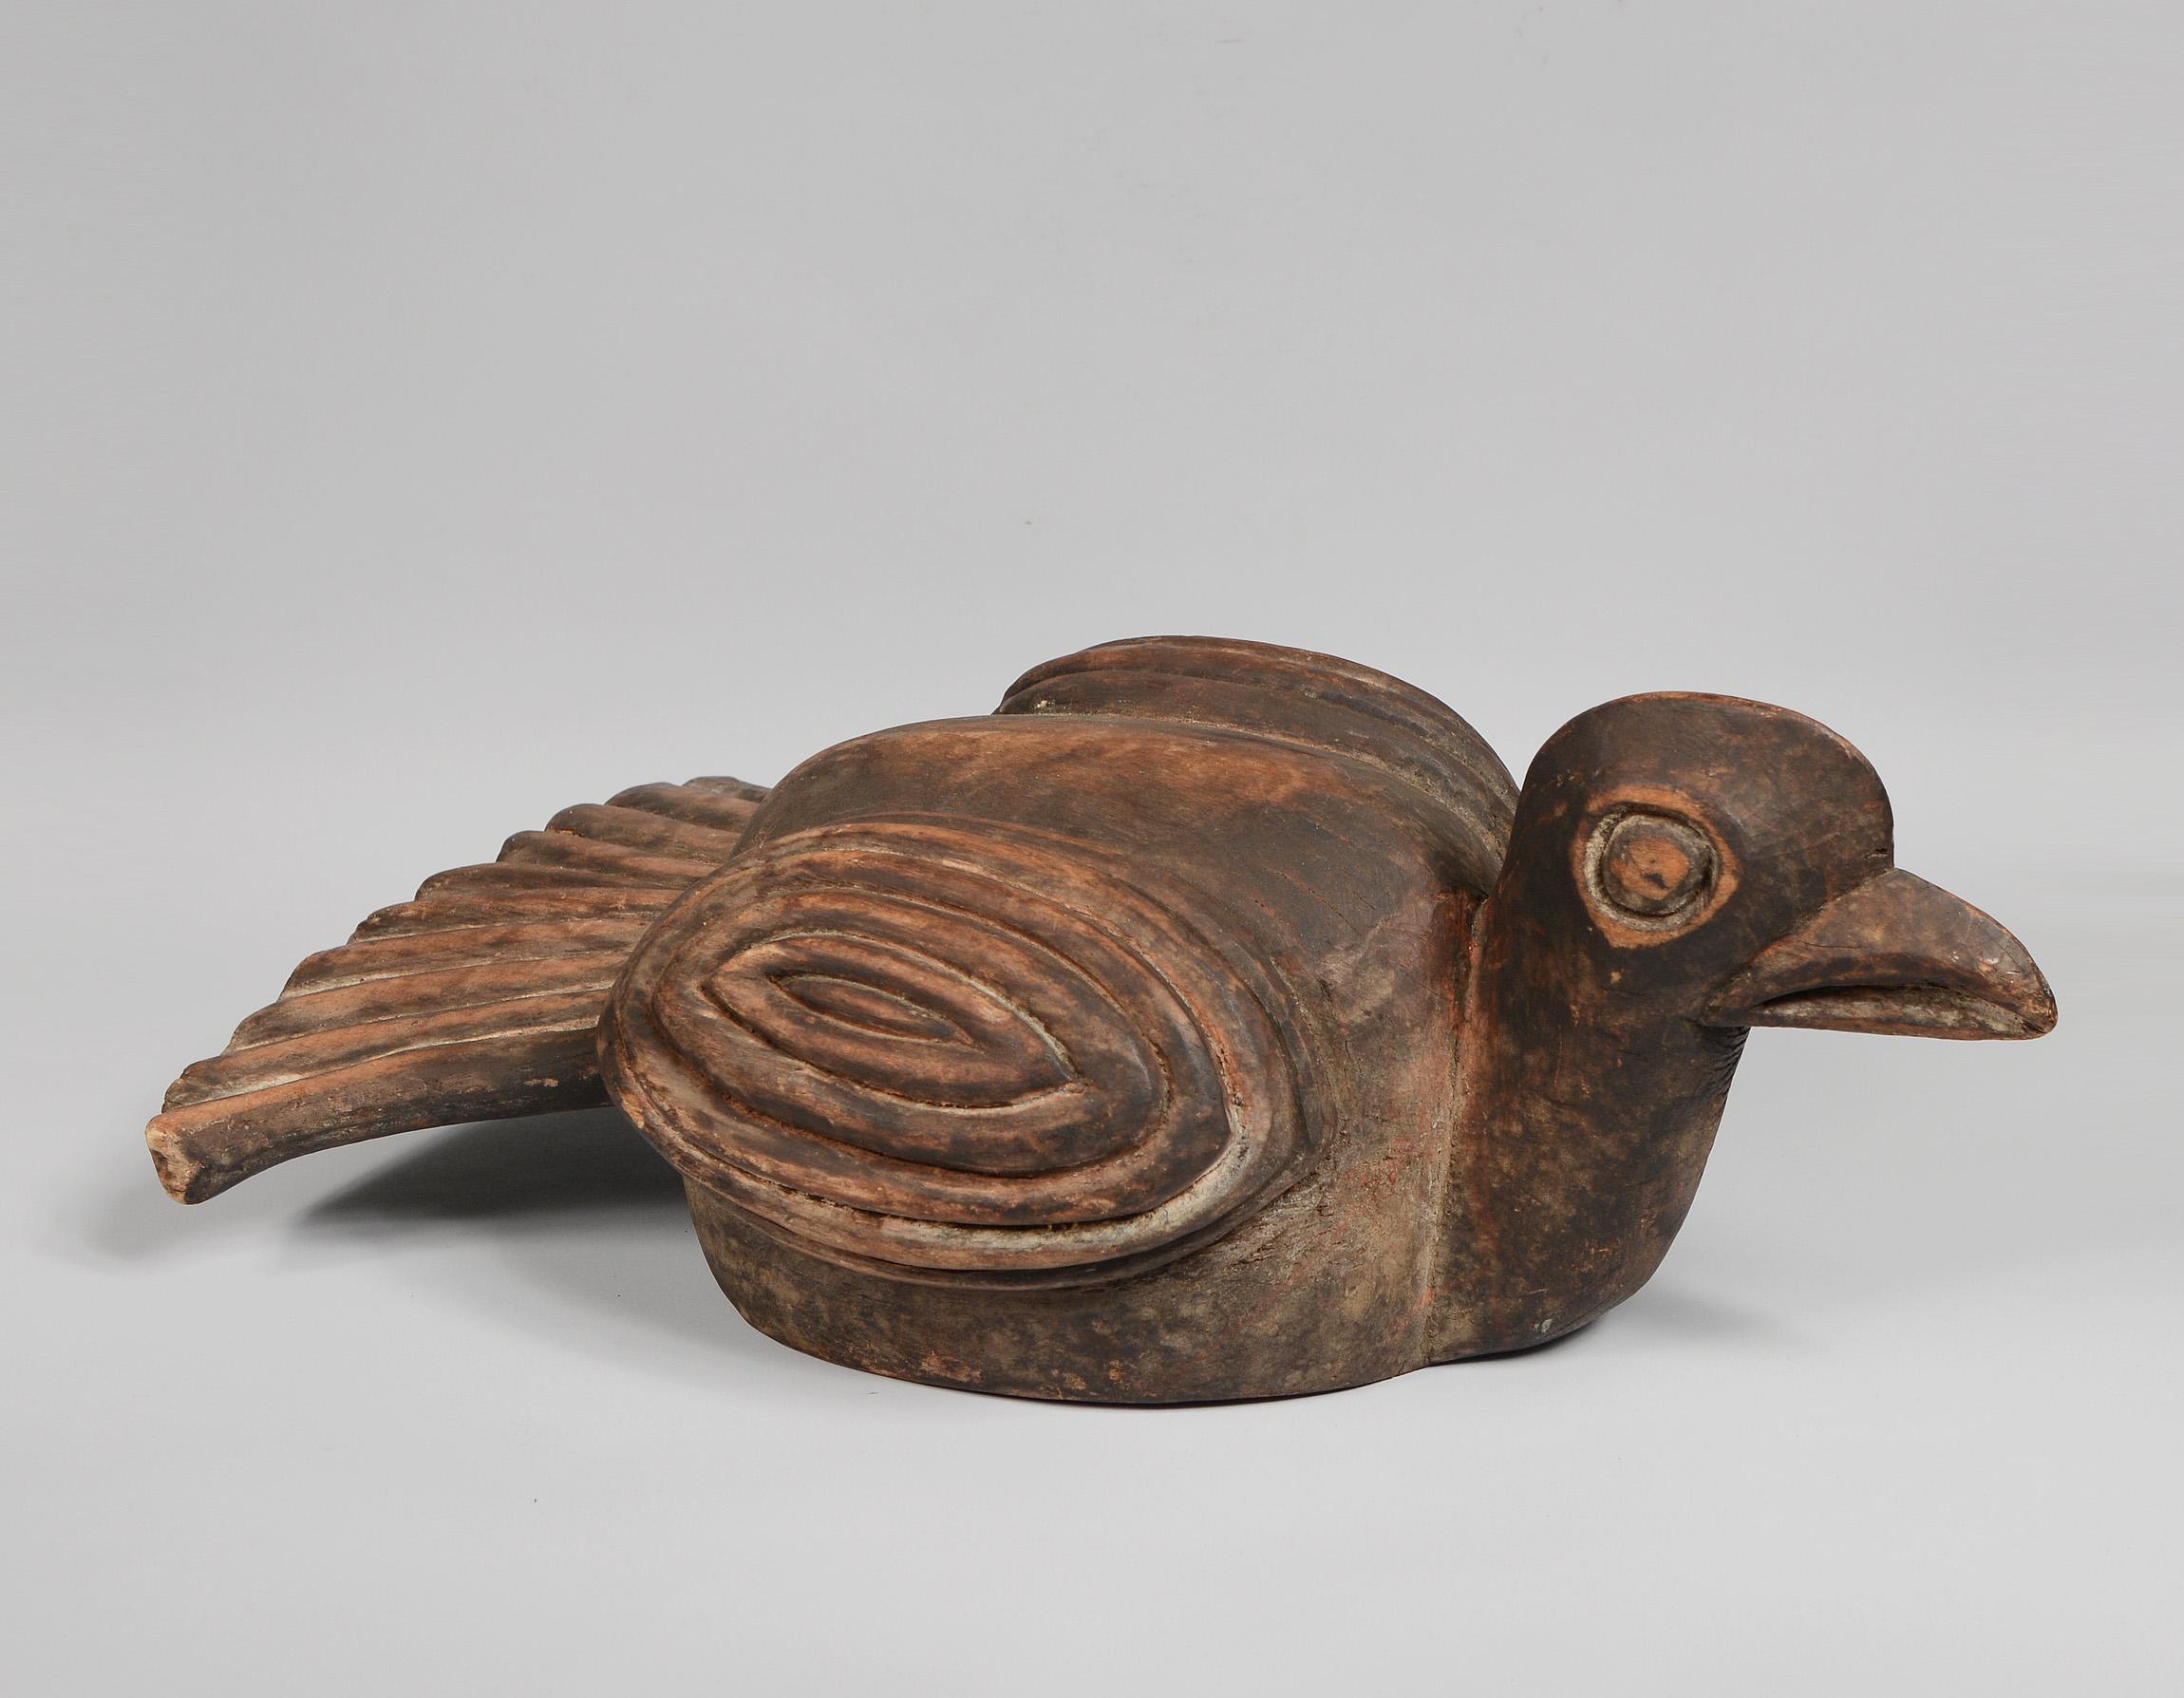 Carved wood and pigment bird form headdress from the Bamileke of Cameroon. This shows wear. There is some pigment loss and a more recent crack on the bottom edge.